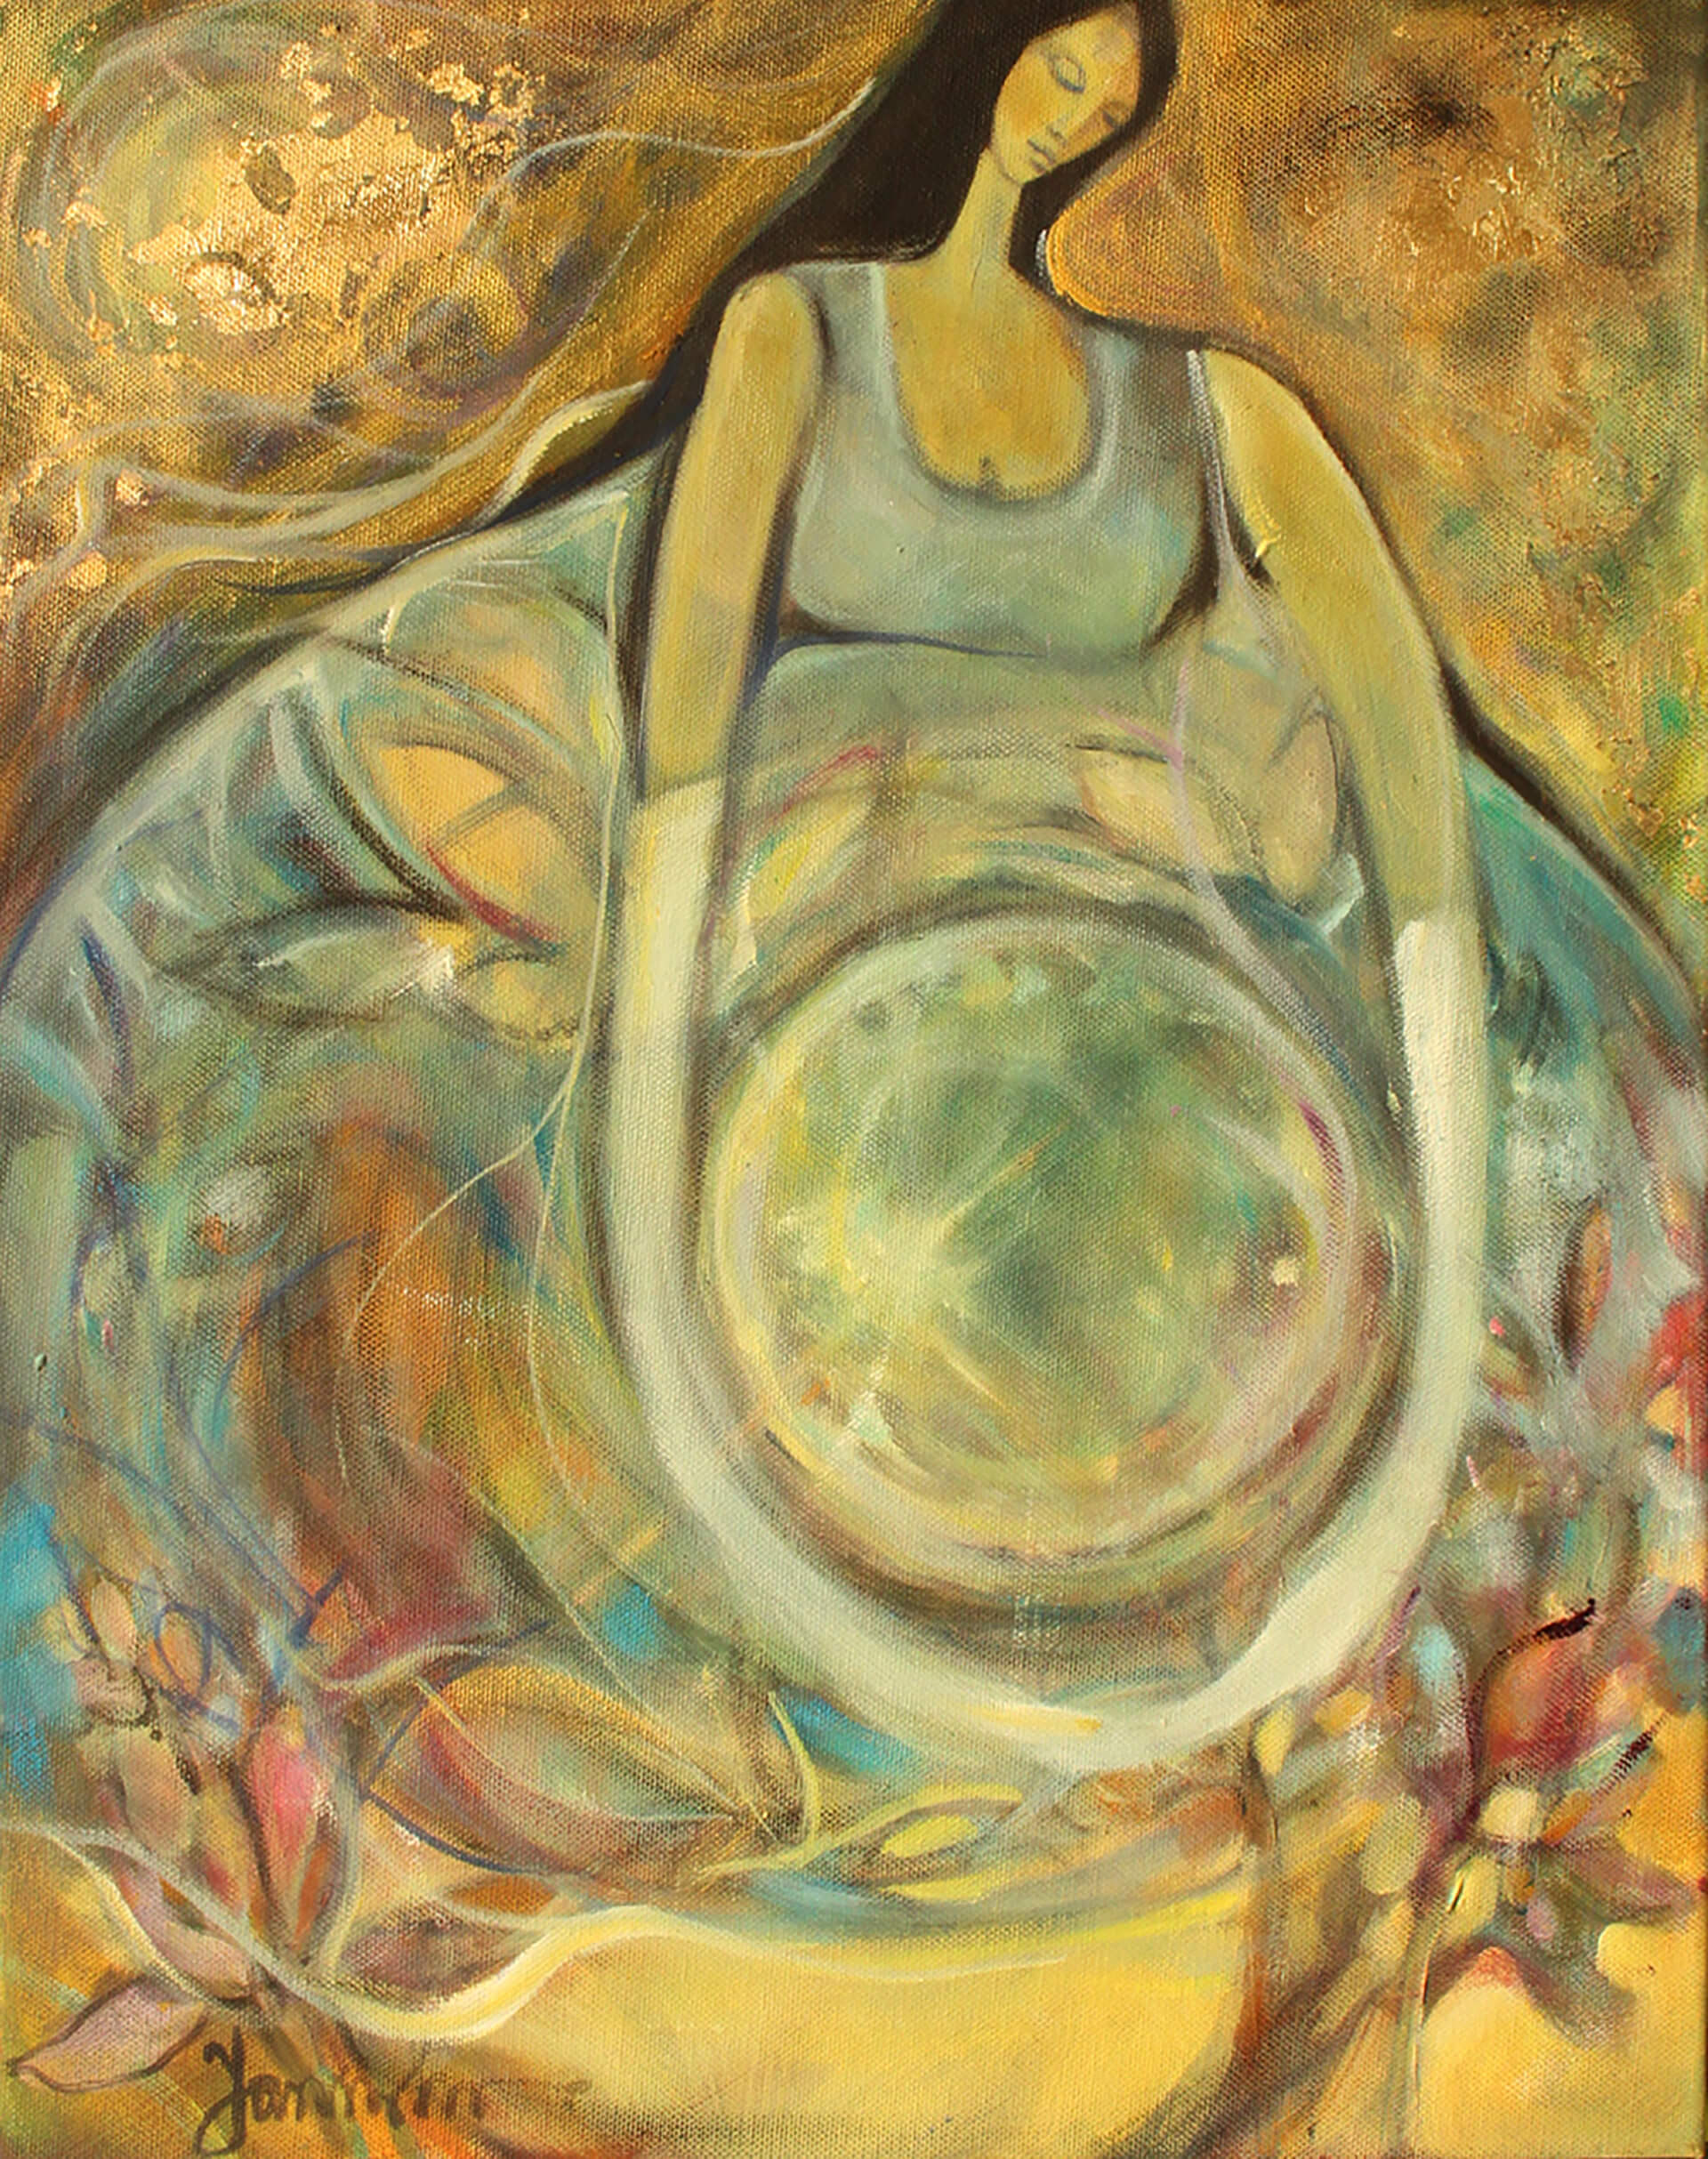 Golden Lady. 40x60 cm. Oil on canvas. Sold